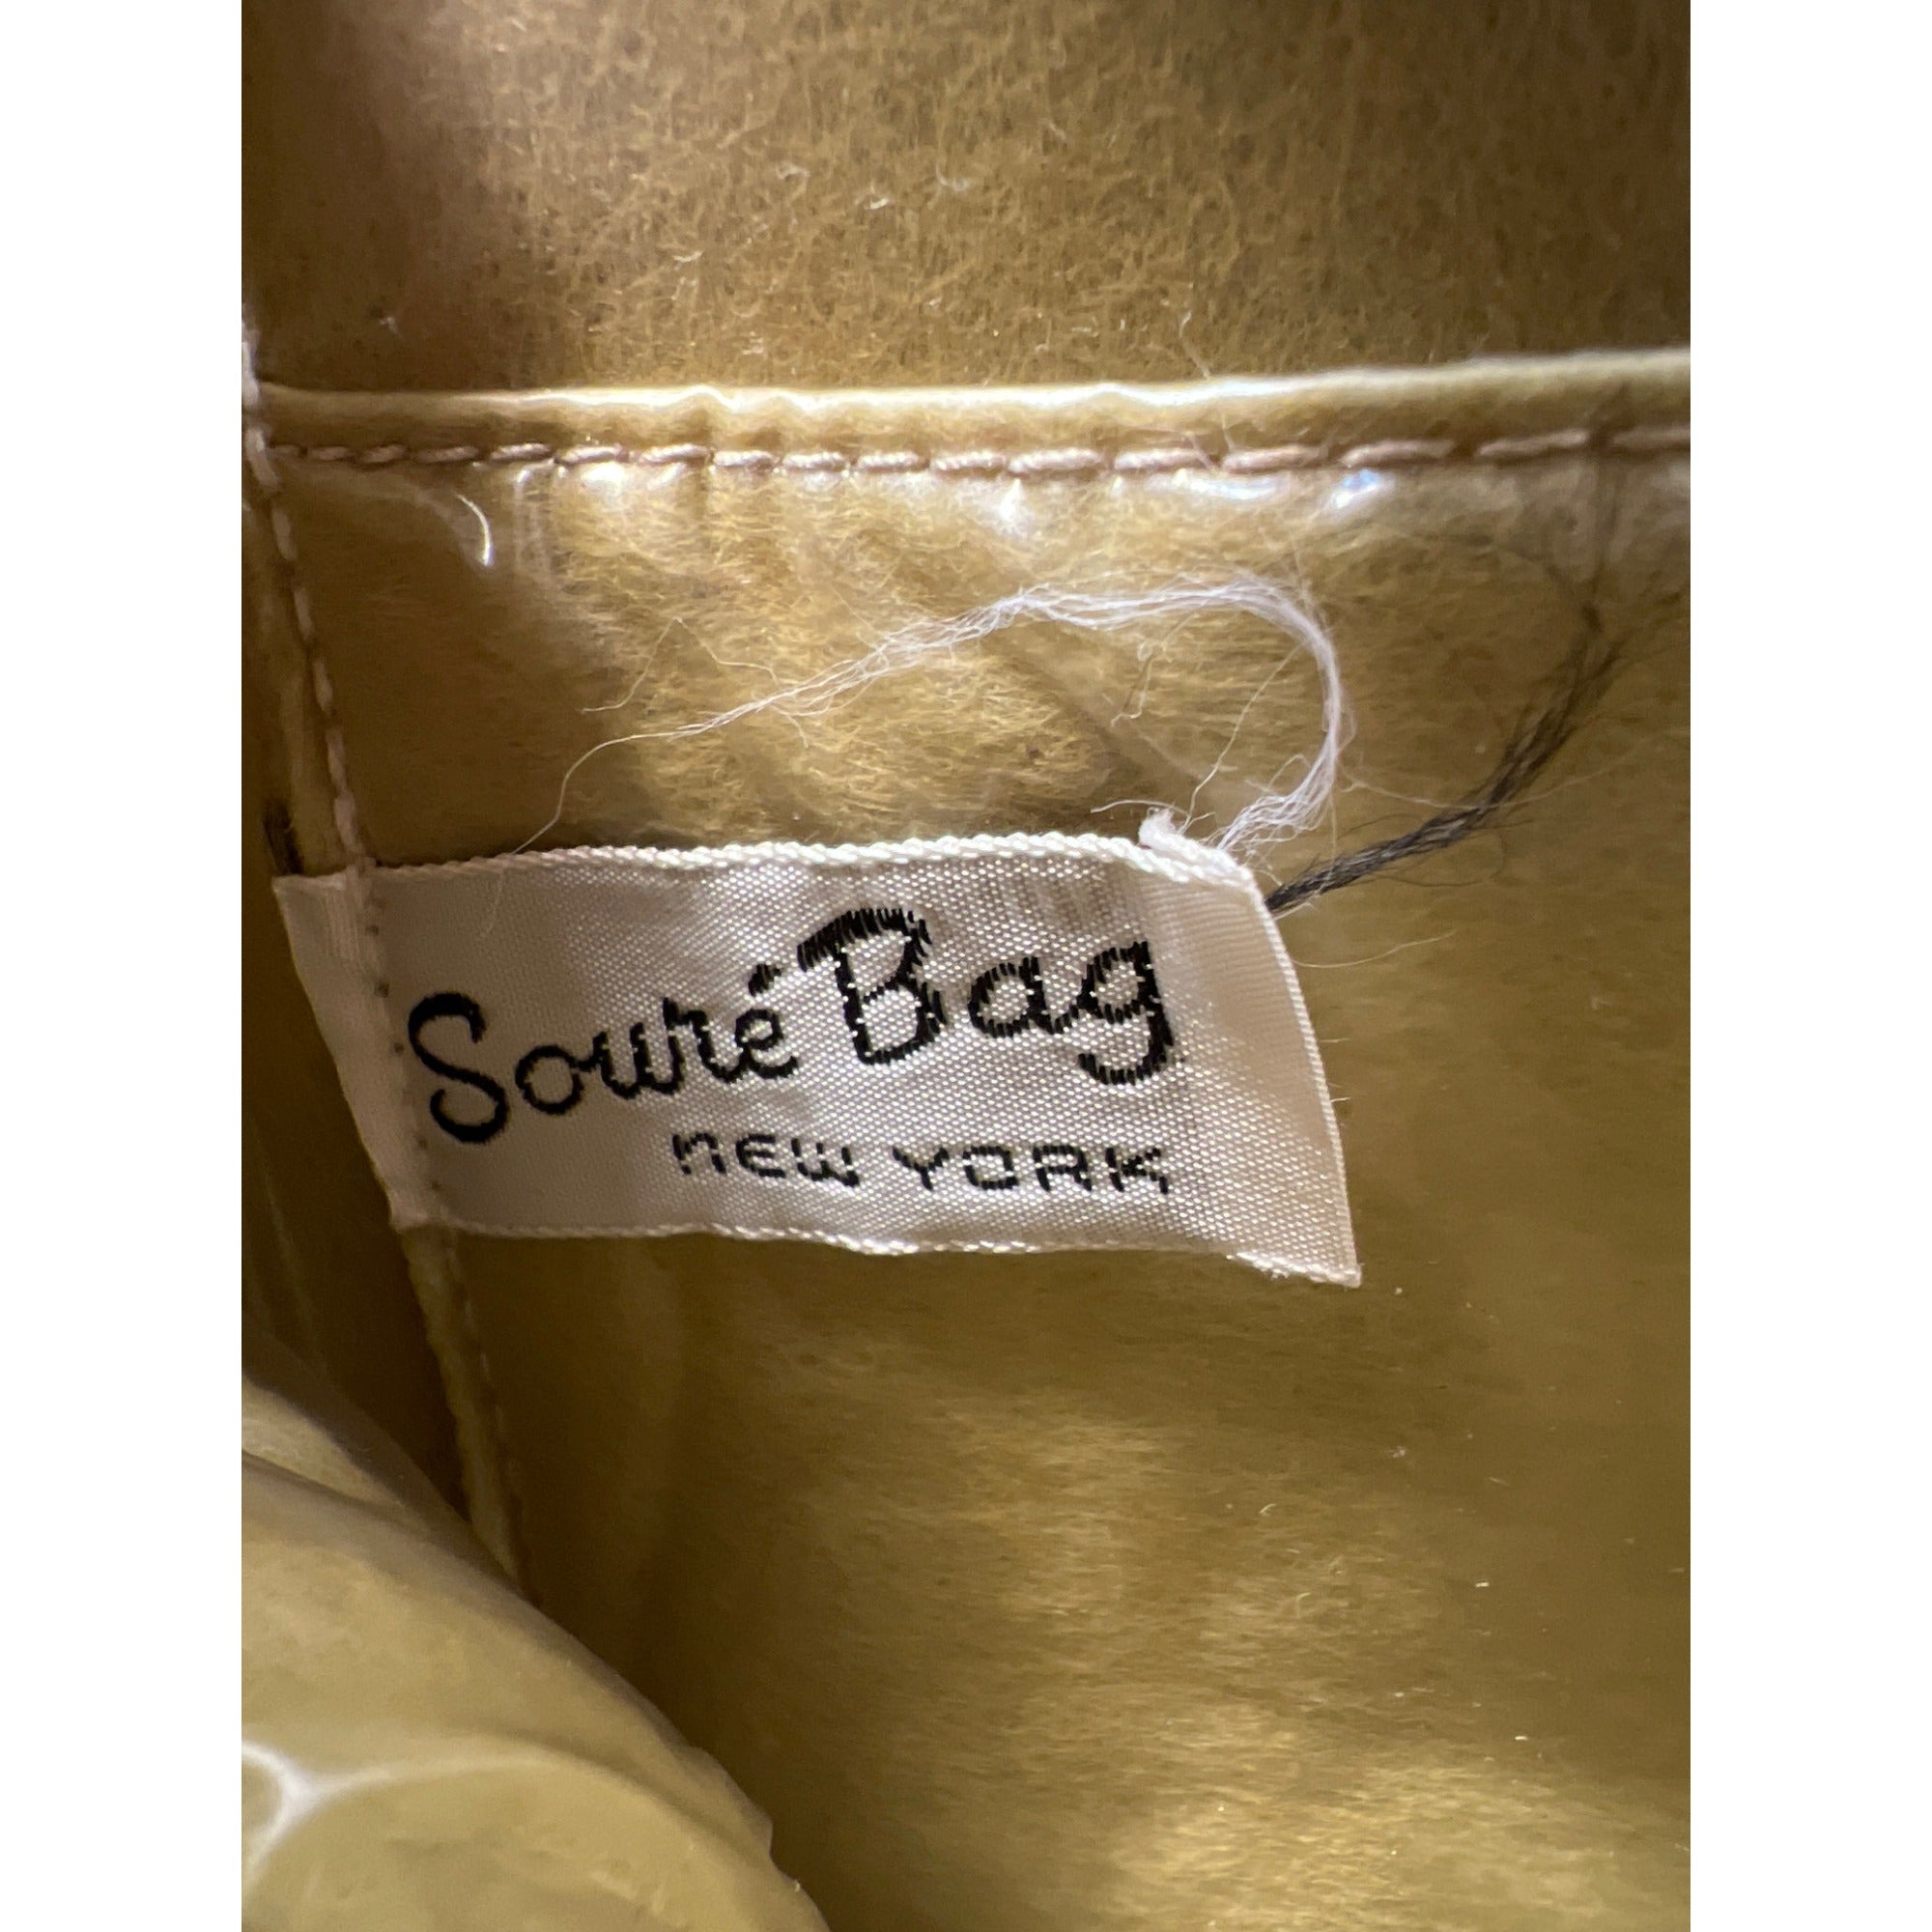 Vintage Soure Bag New York 1940s Whimsical Floral Embroidery Design Collectible